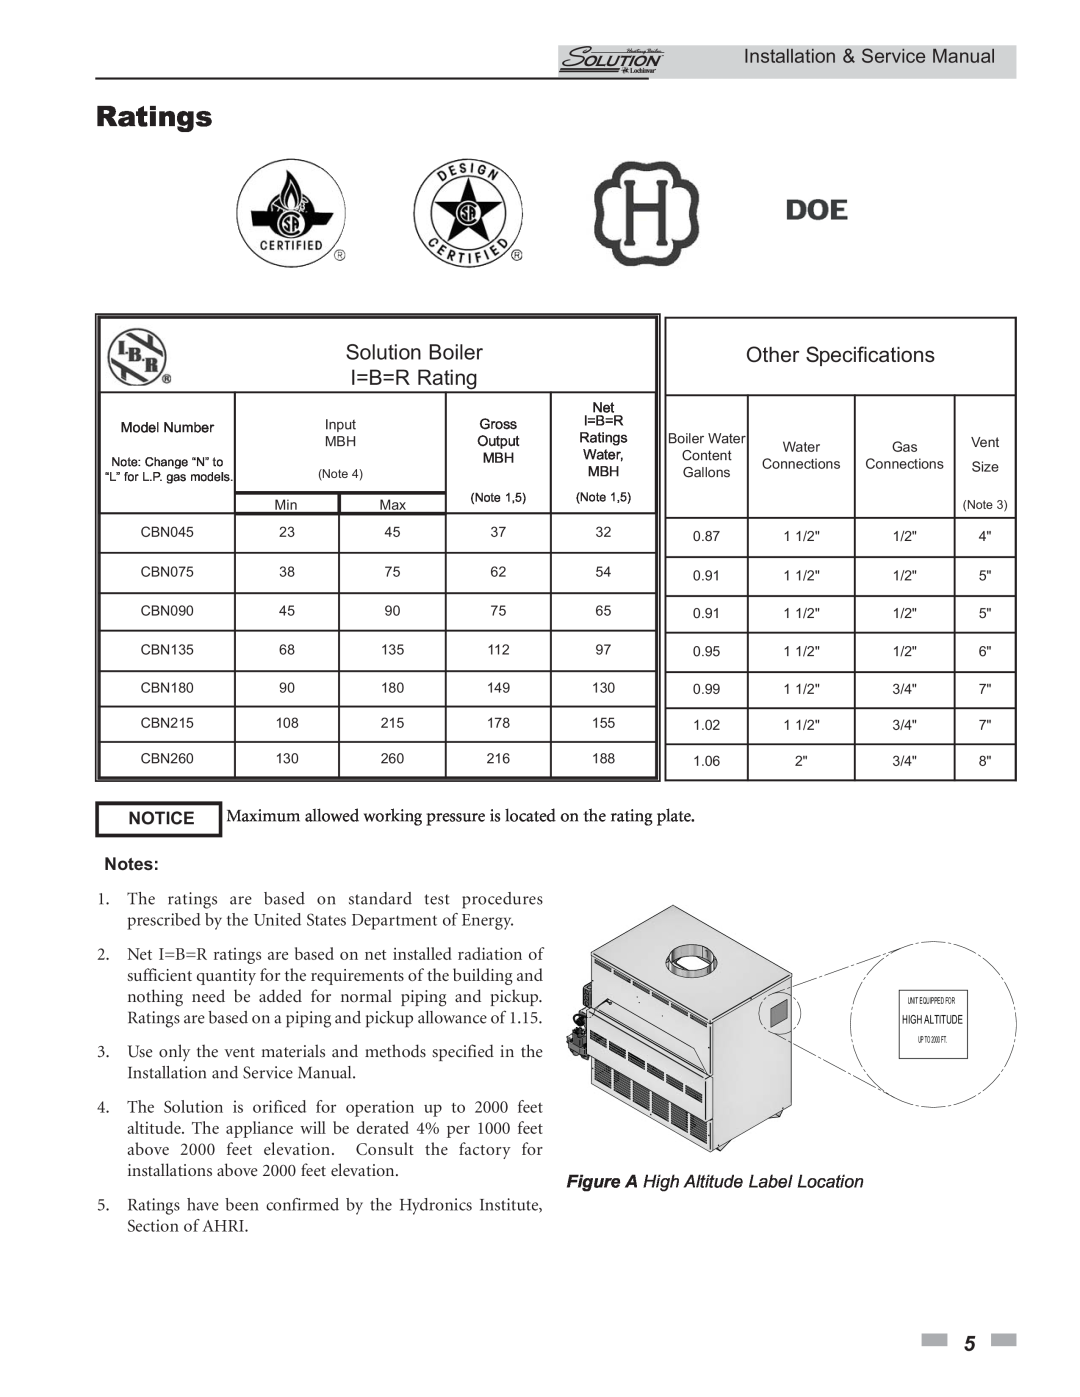 Lochinvar 000 - 260, 45 Ratings, Solution Boiler I=B=R Rating, Other Specifications, Figure A High Altitude Label Location 